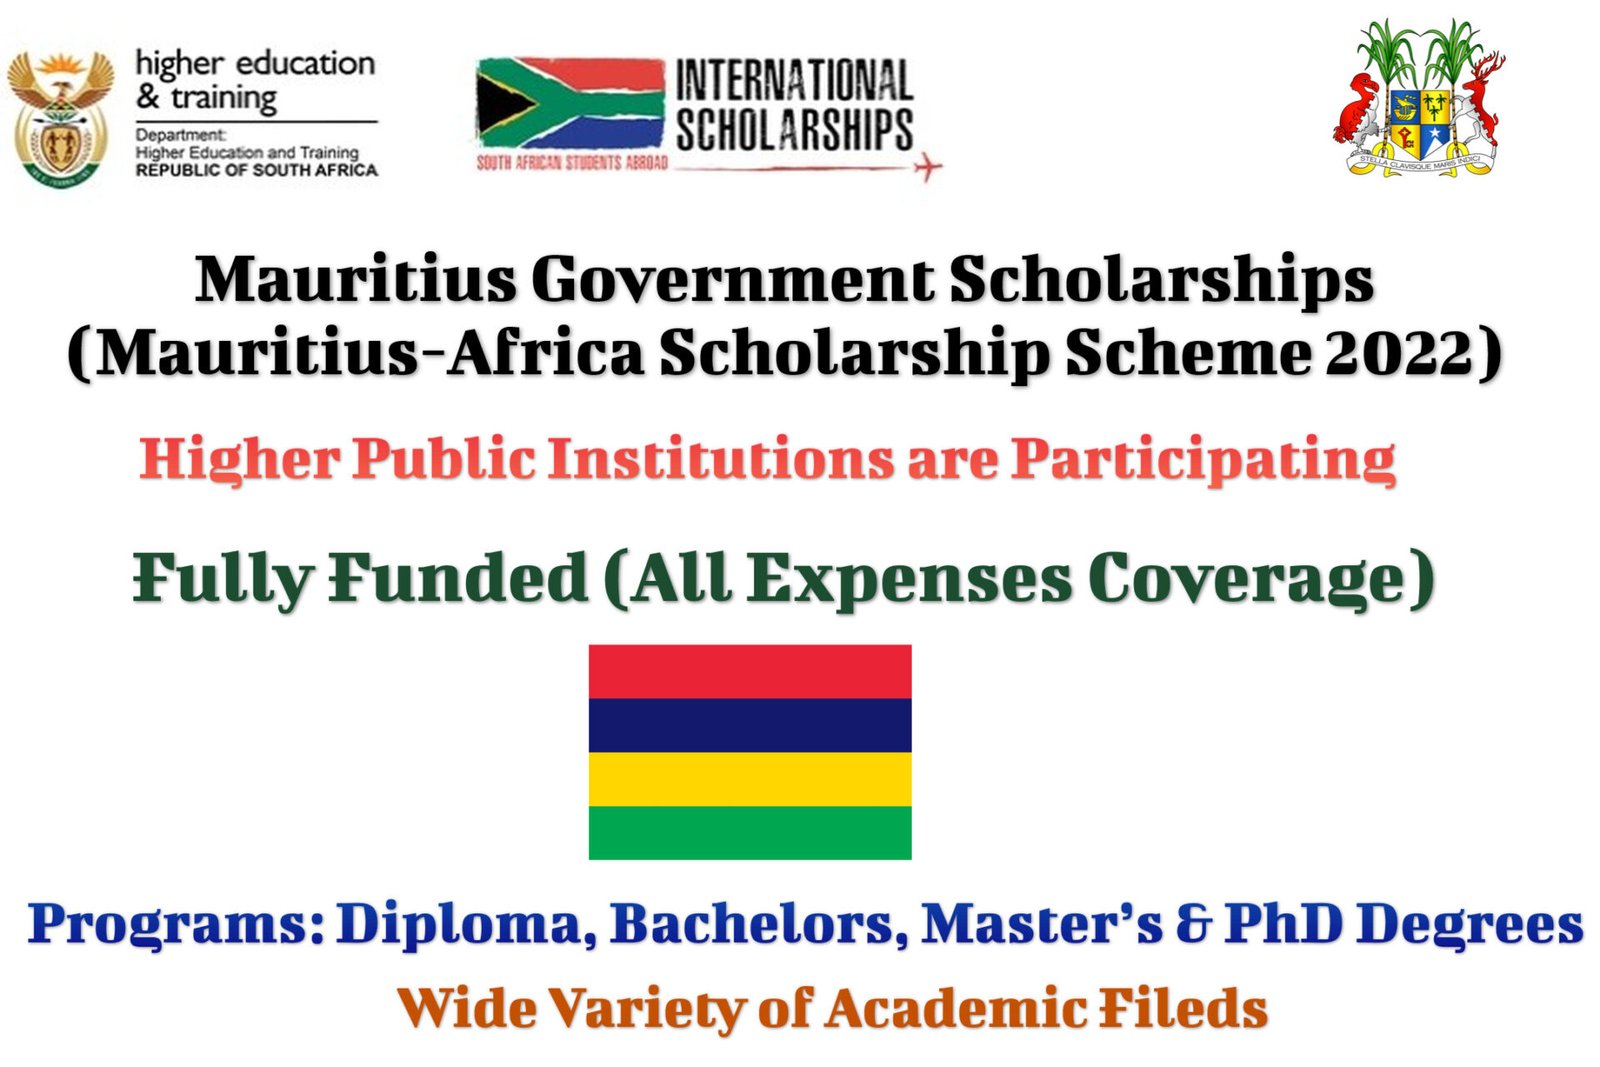 Mauritius-Africa Scholarship Scheme 2022(Fully Funded) - Apply Here